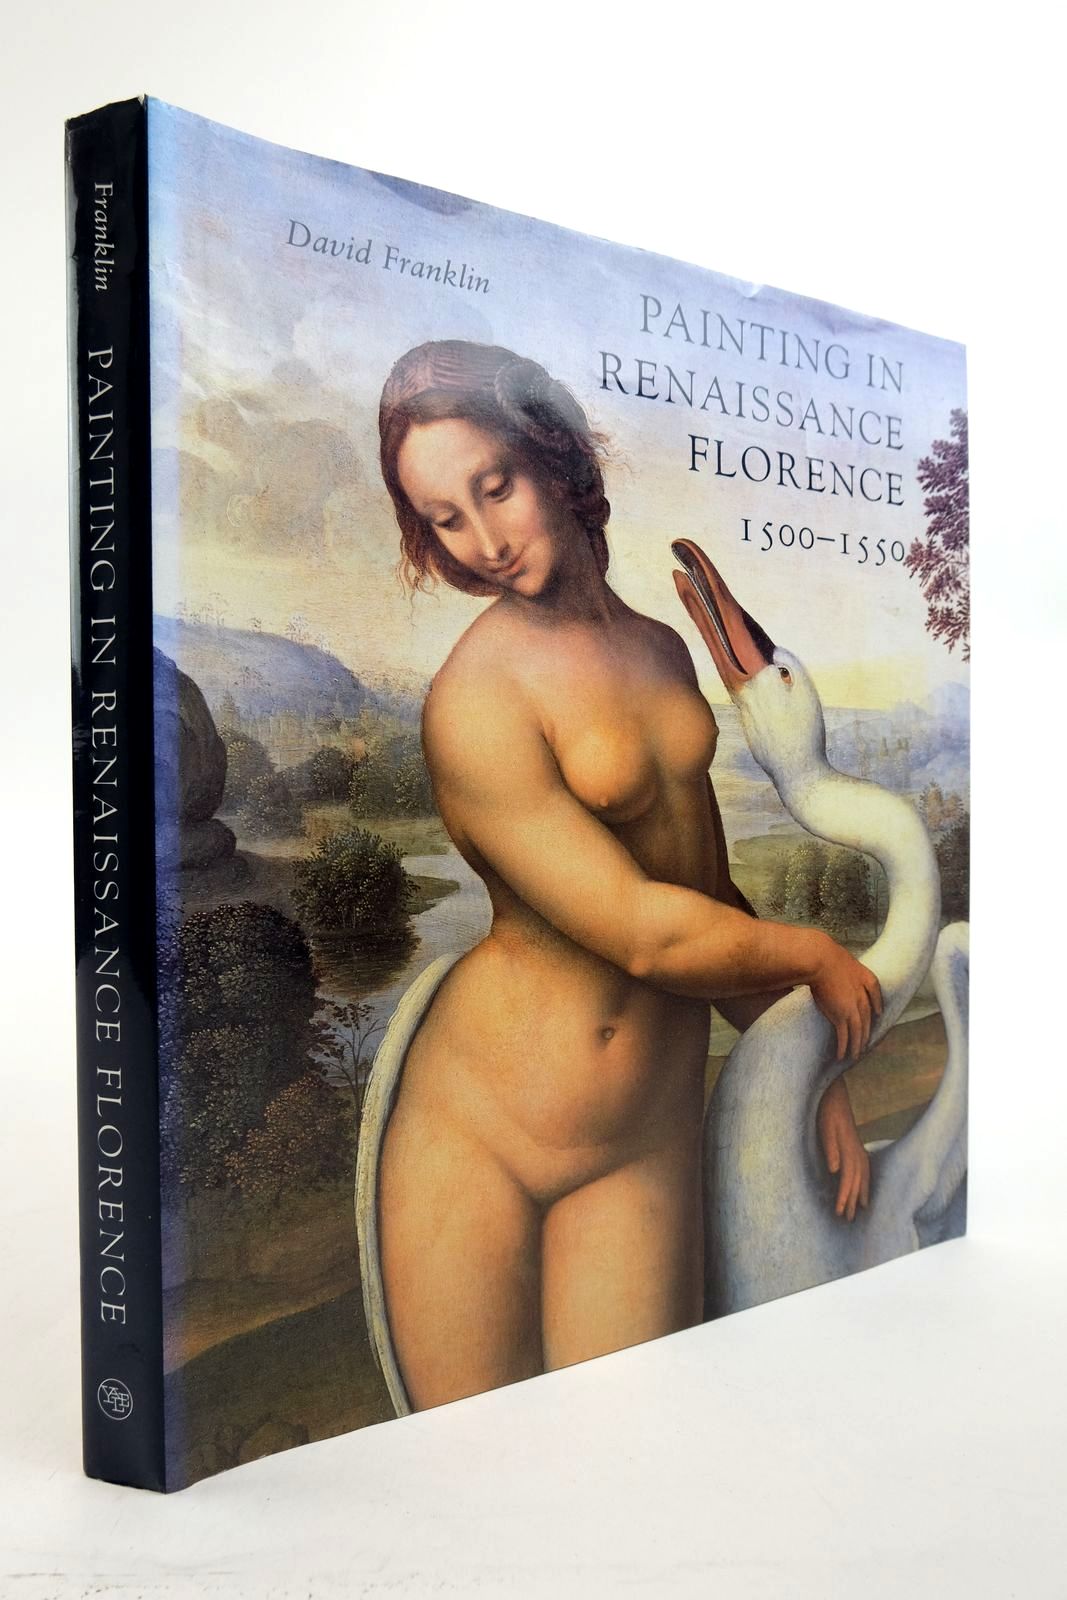 Photo of PAINTING IN RENAISSANCE FLORENCE 1500-1550 written by Franklin, David published by Yale University Press (STOCK CODE: 2139037)  for sale by Stella & Rose's Books